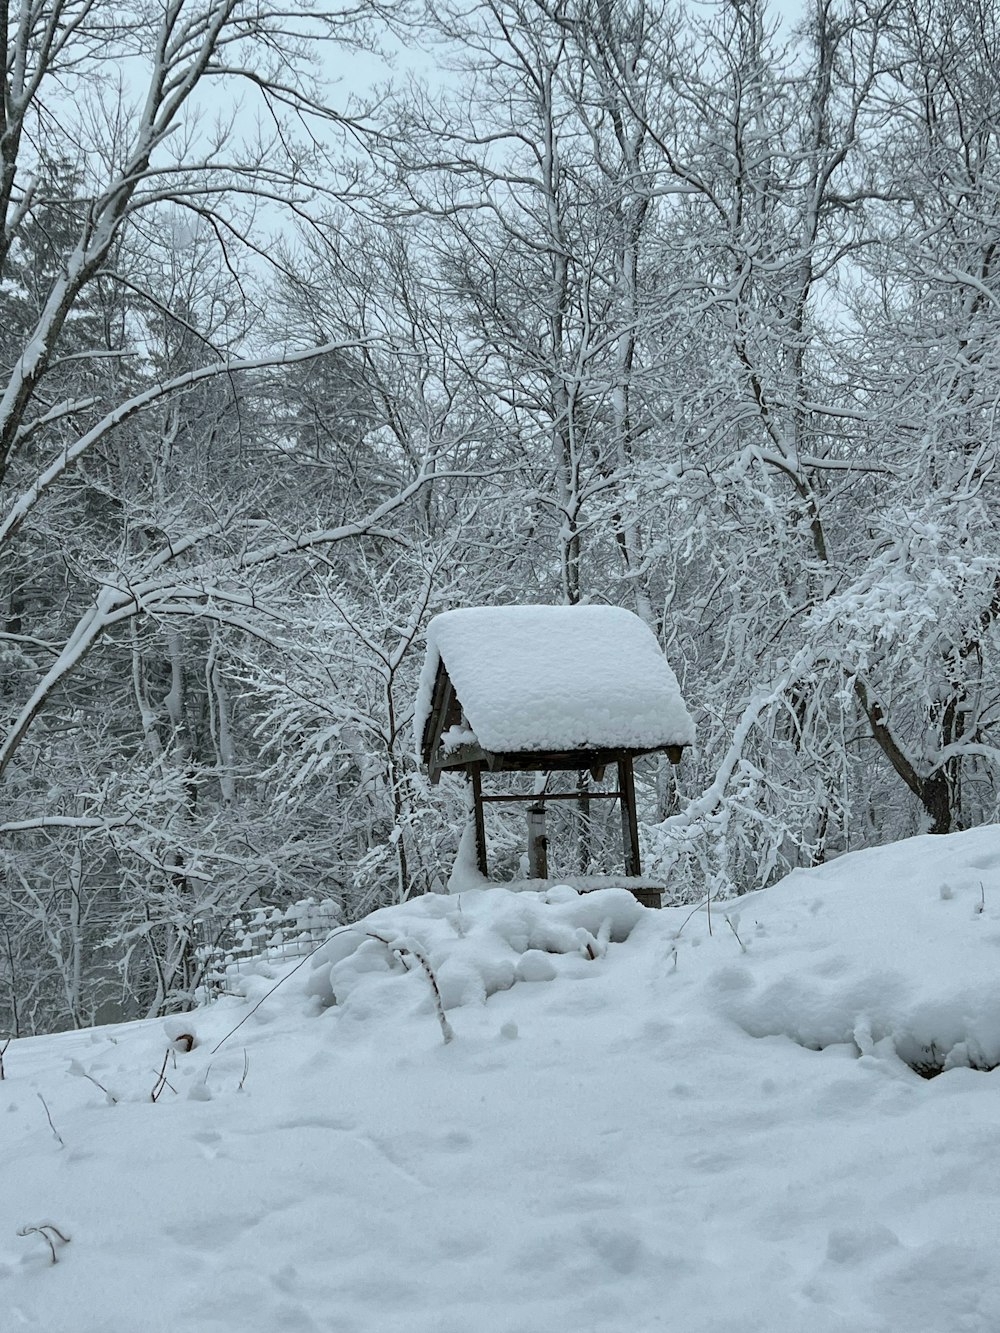 a small wooden structure in the middle of a snowy forest